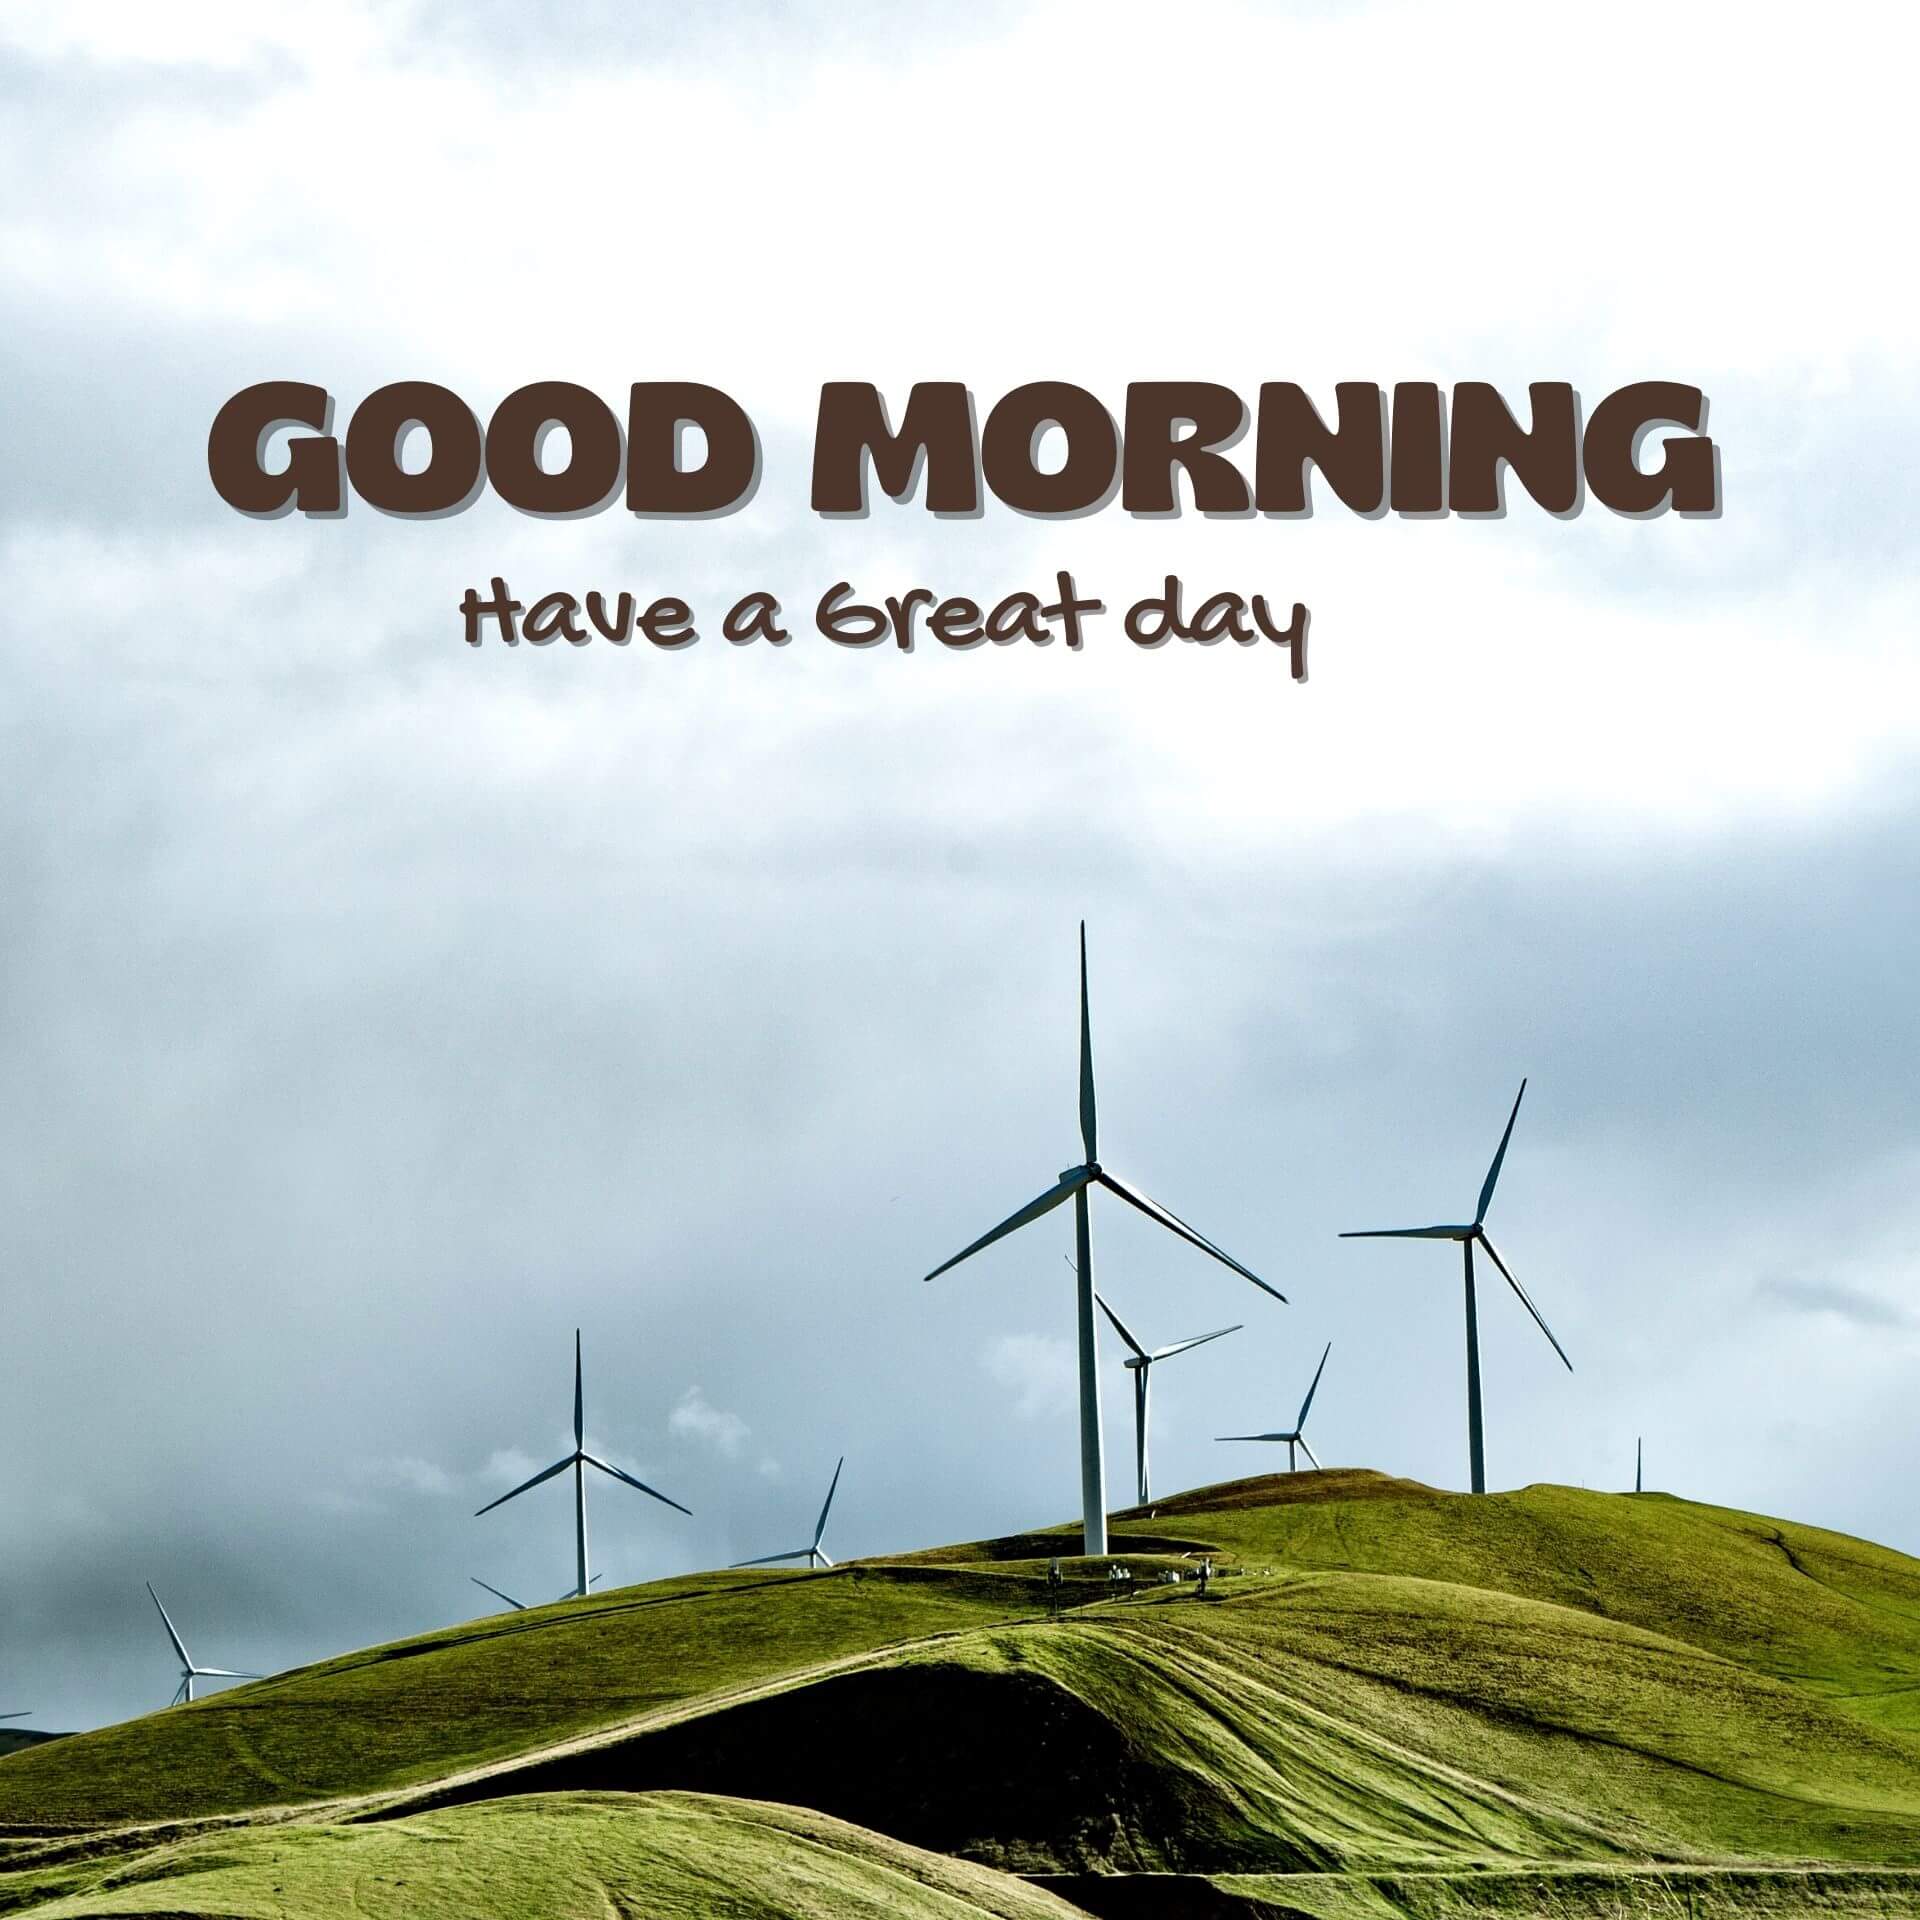 Good morning have a nice day Wallpaper new Download 2